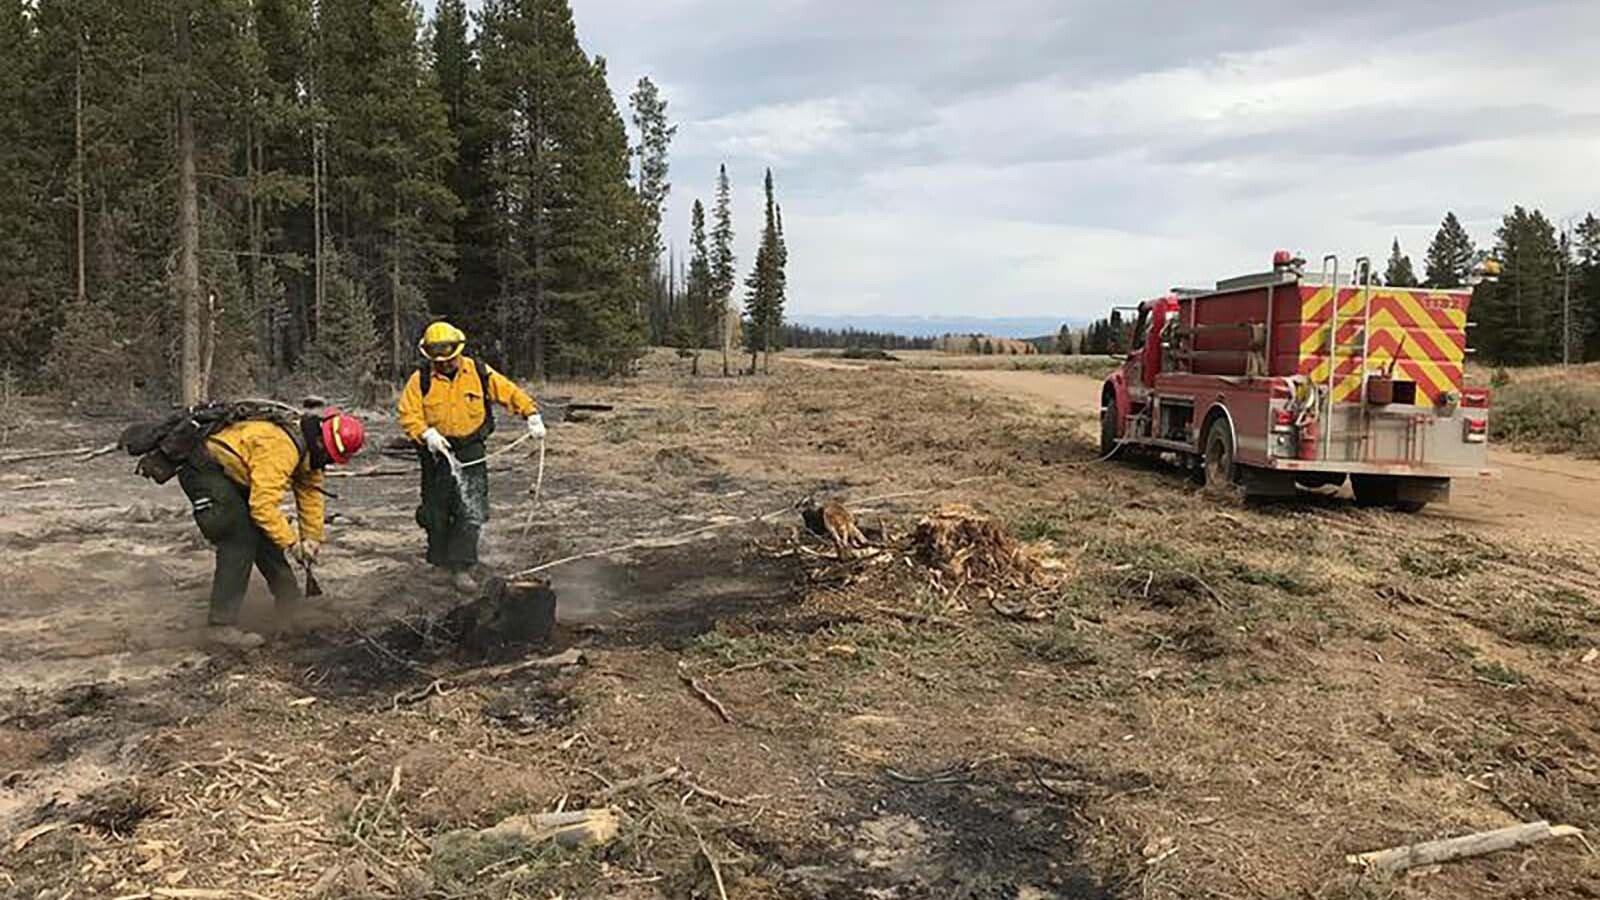 Fire crews put out a hot spot in the Roosevelt Fire in Wyoming in 2018, which burned more than 65,000 acres and 55 homes.